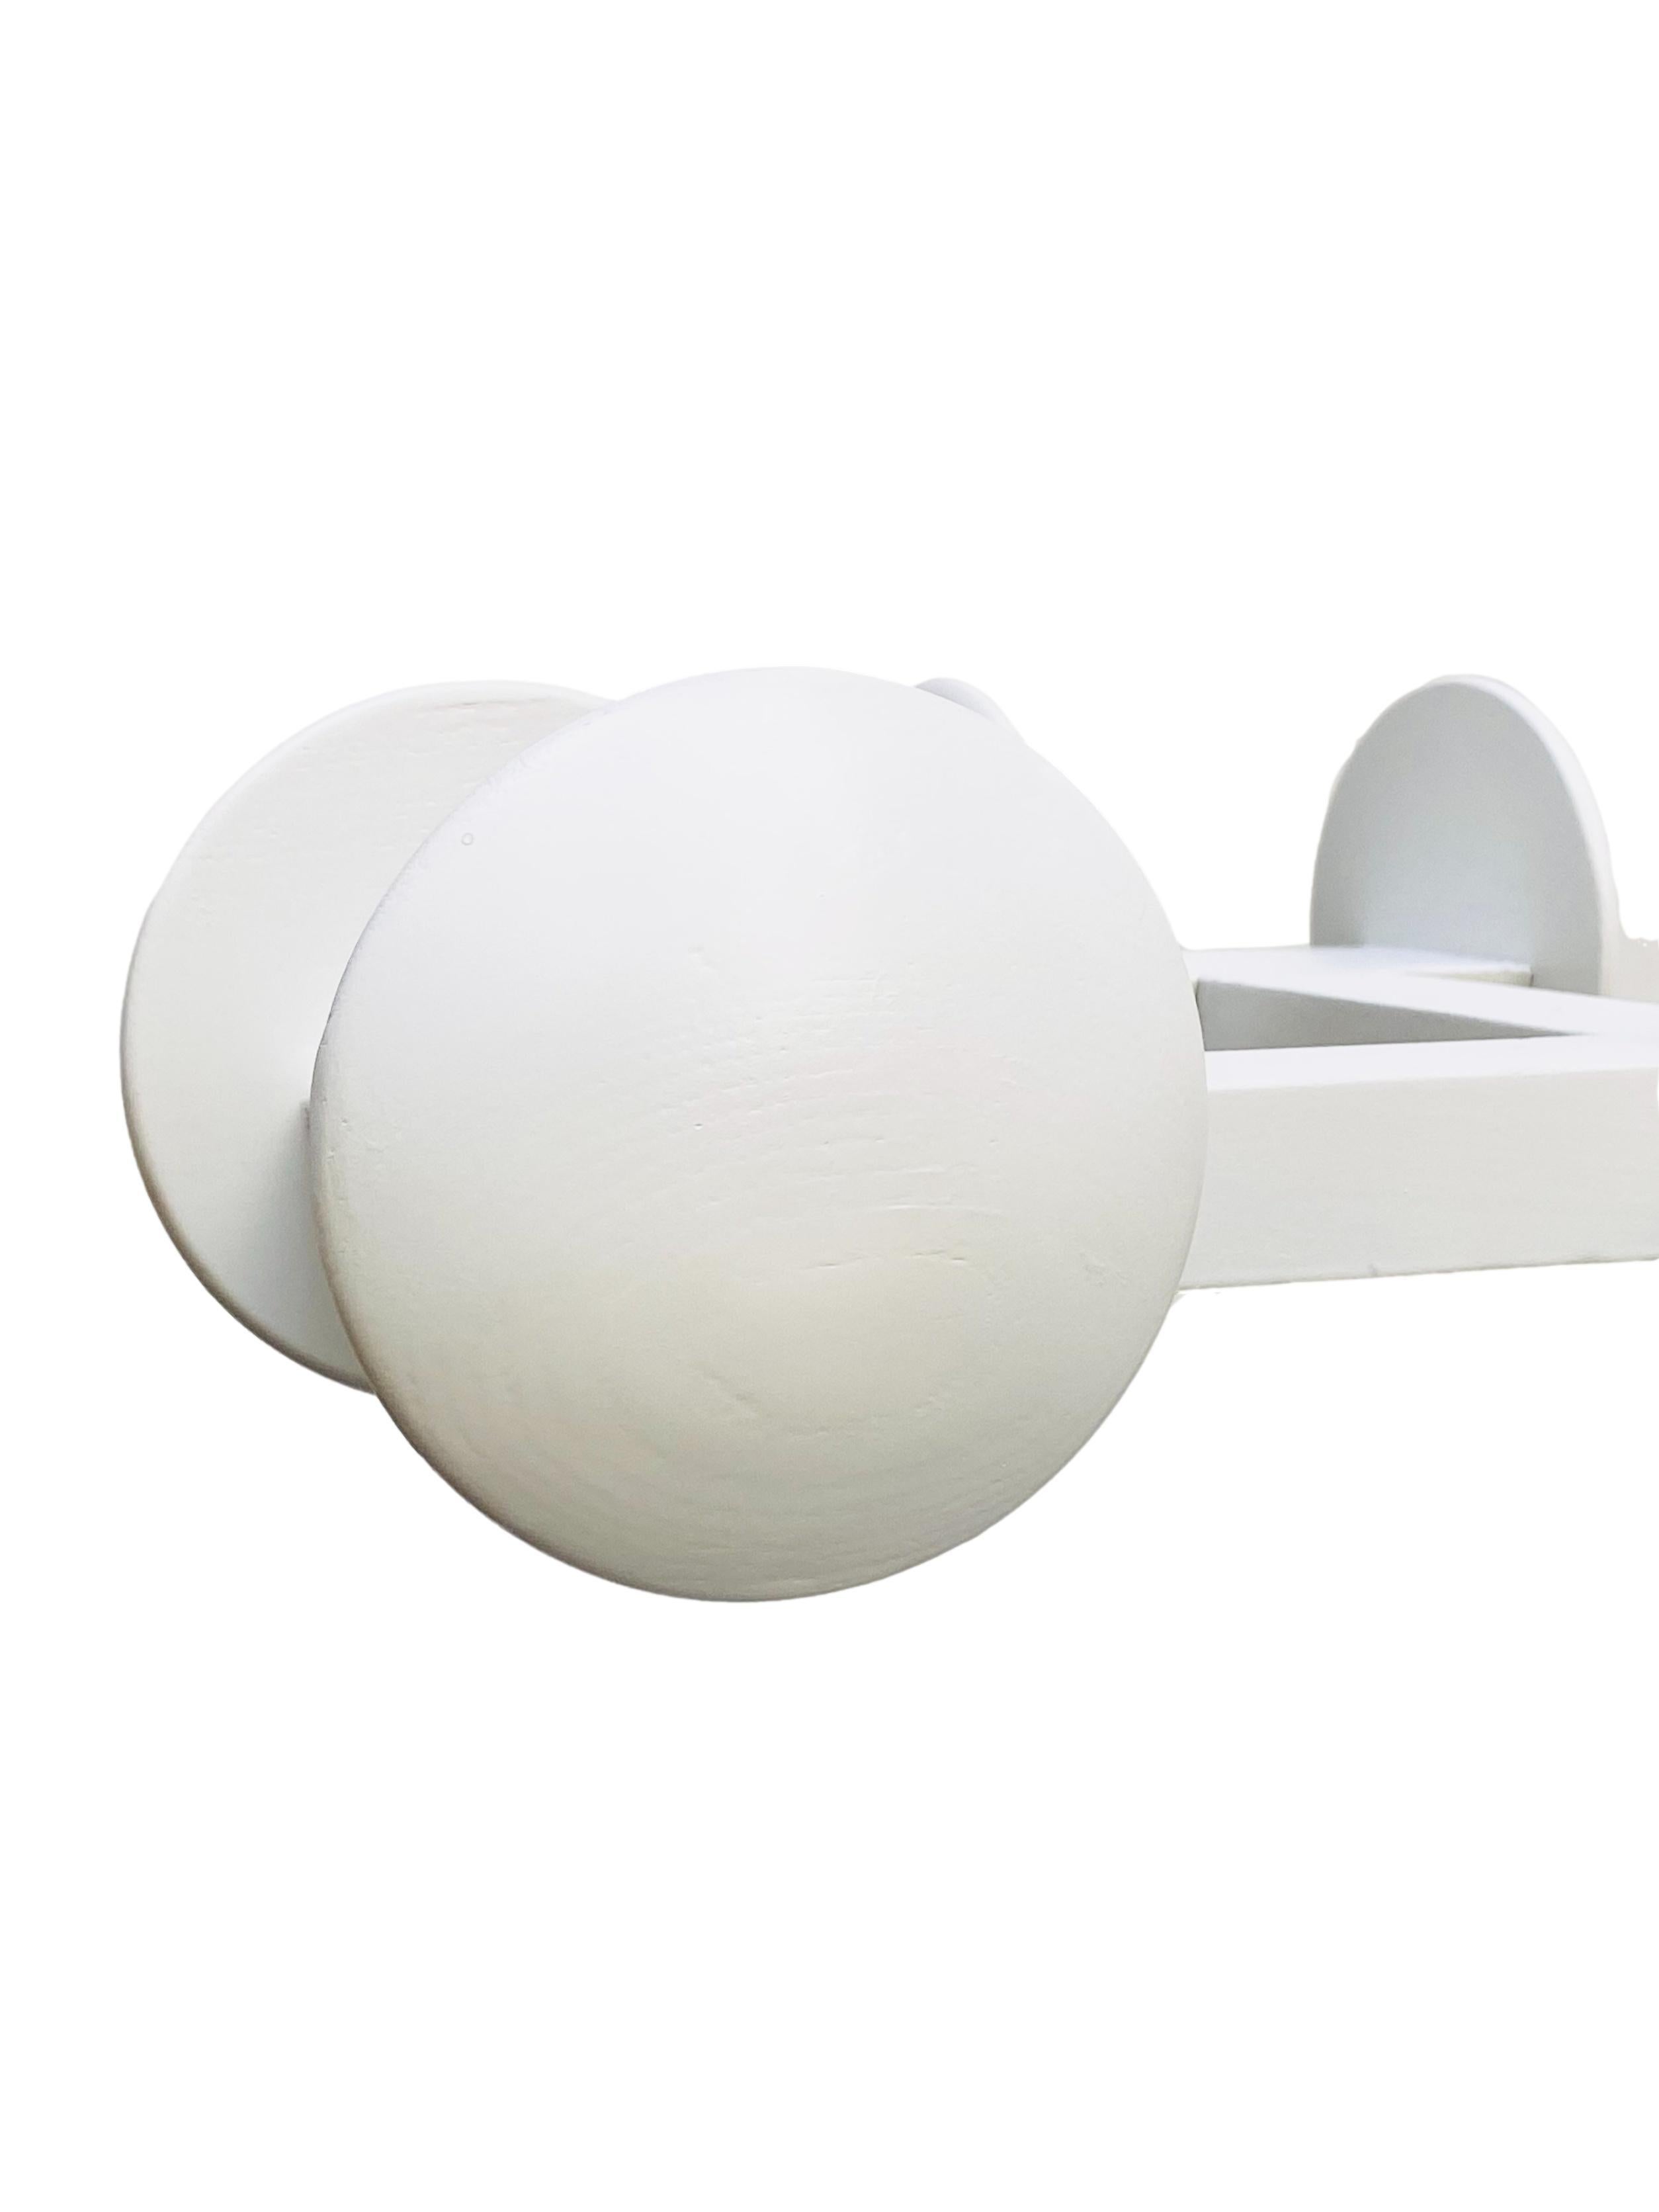 Beautiful Sputnik removable coat stand from the 60s with wooden balls. Made entirely of solid white lacquered beech wood. The design is very similar to the coat hangers that Nana Ditzel designed in Denmark in the 1960s.